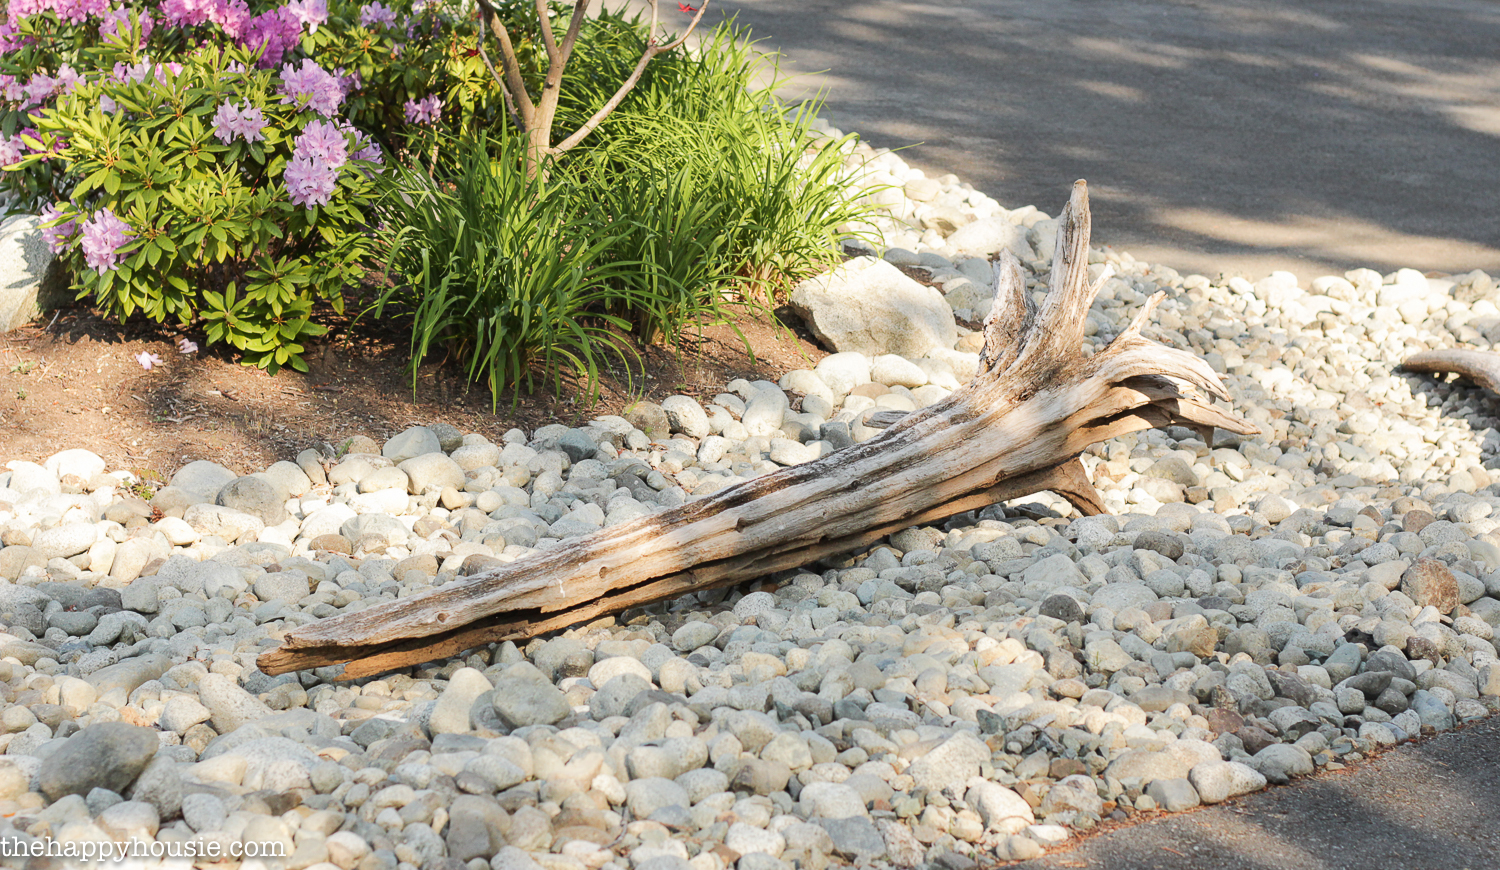 A large piece of driftwood in the river rock with purple flowers beside it.